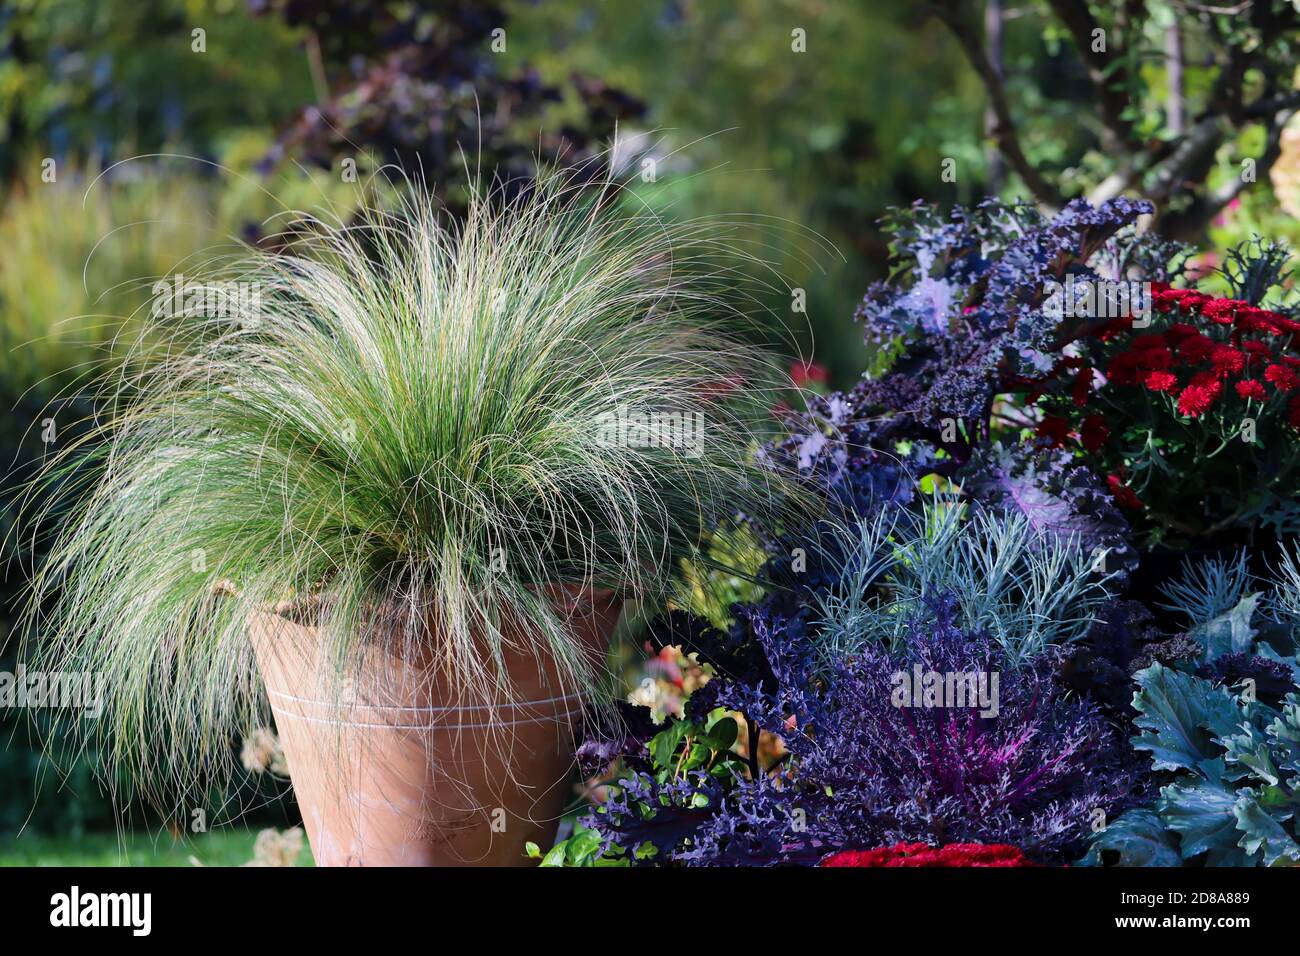 Ornamental Grasses- Mexican Feather Grass, Nassella tenuissima, highlighted by the evening sun surrounded by ornamental kale and mums Stock Photo